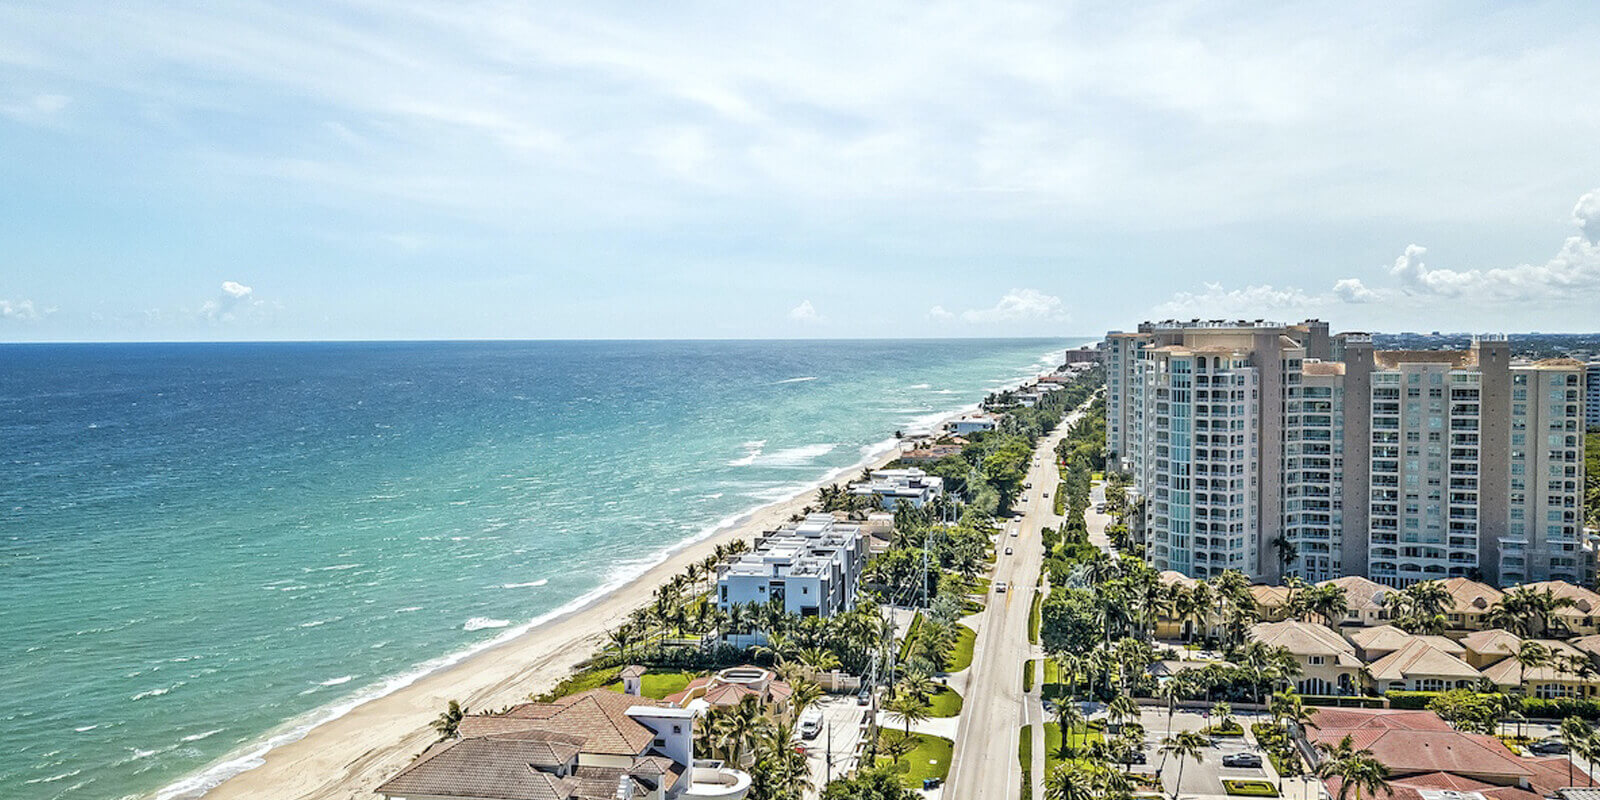 Aerial view of Boca Raton luxury homes, including the beach and condos